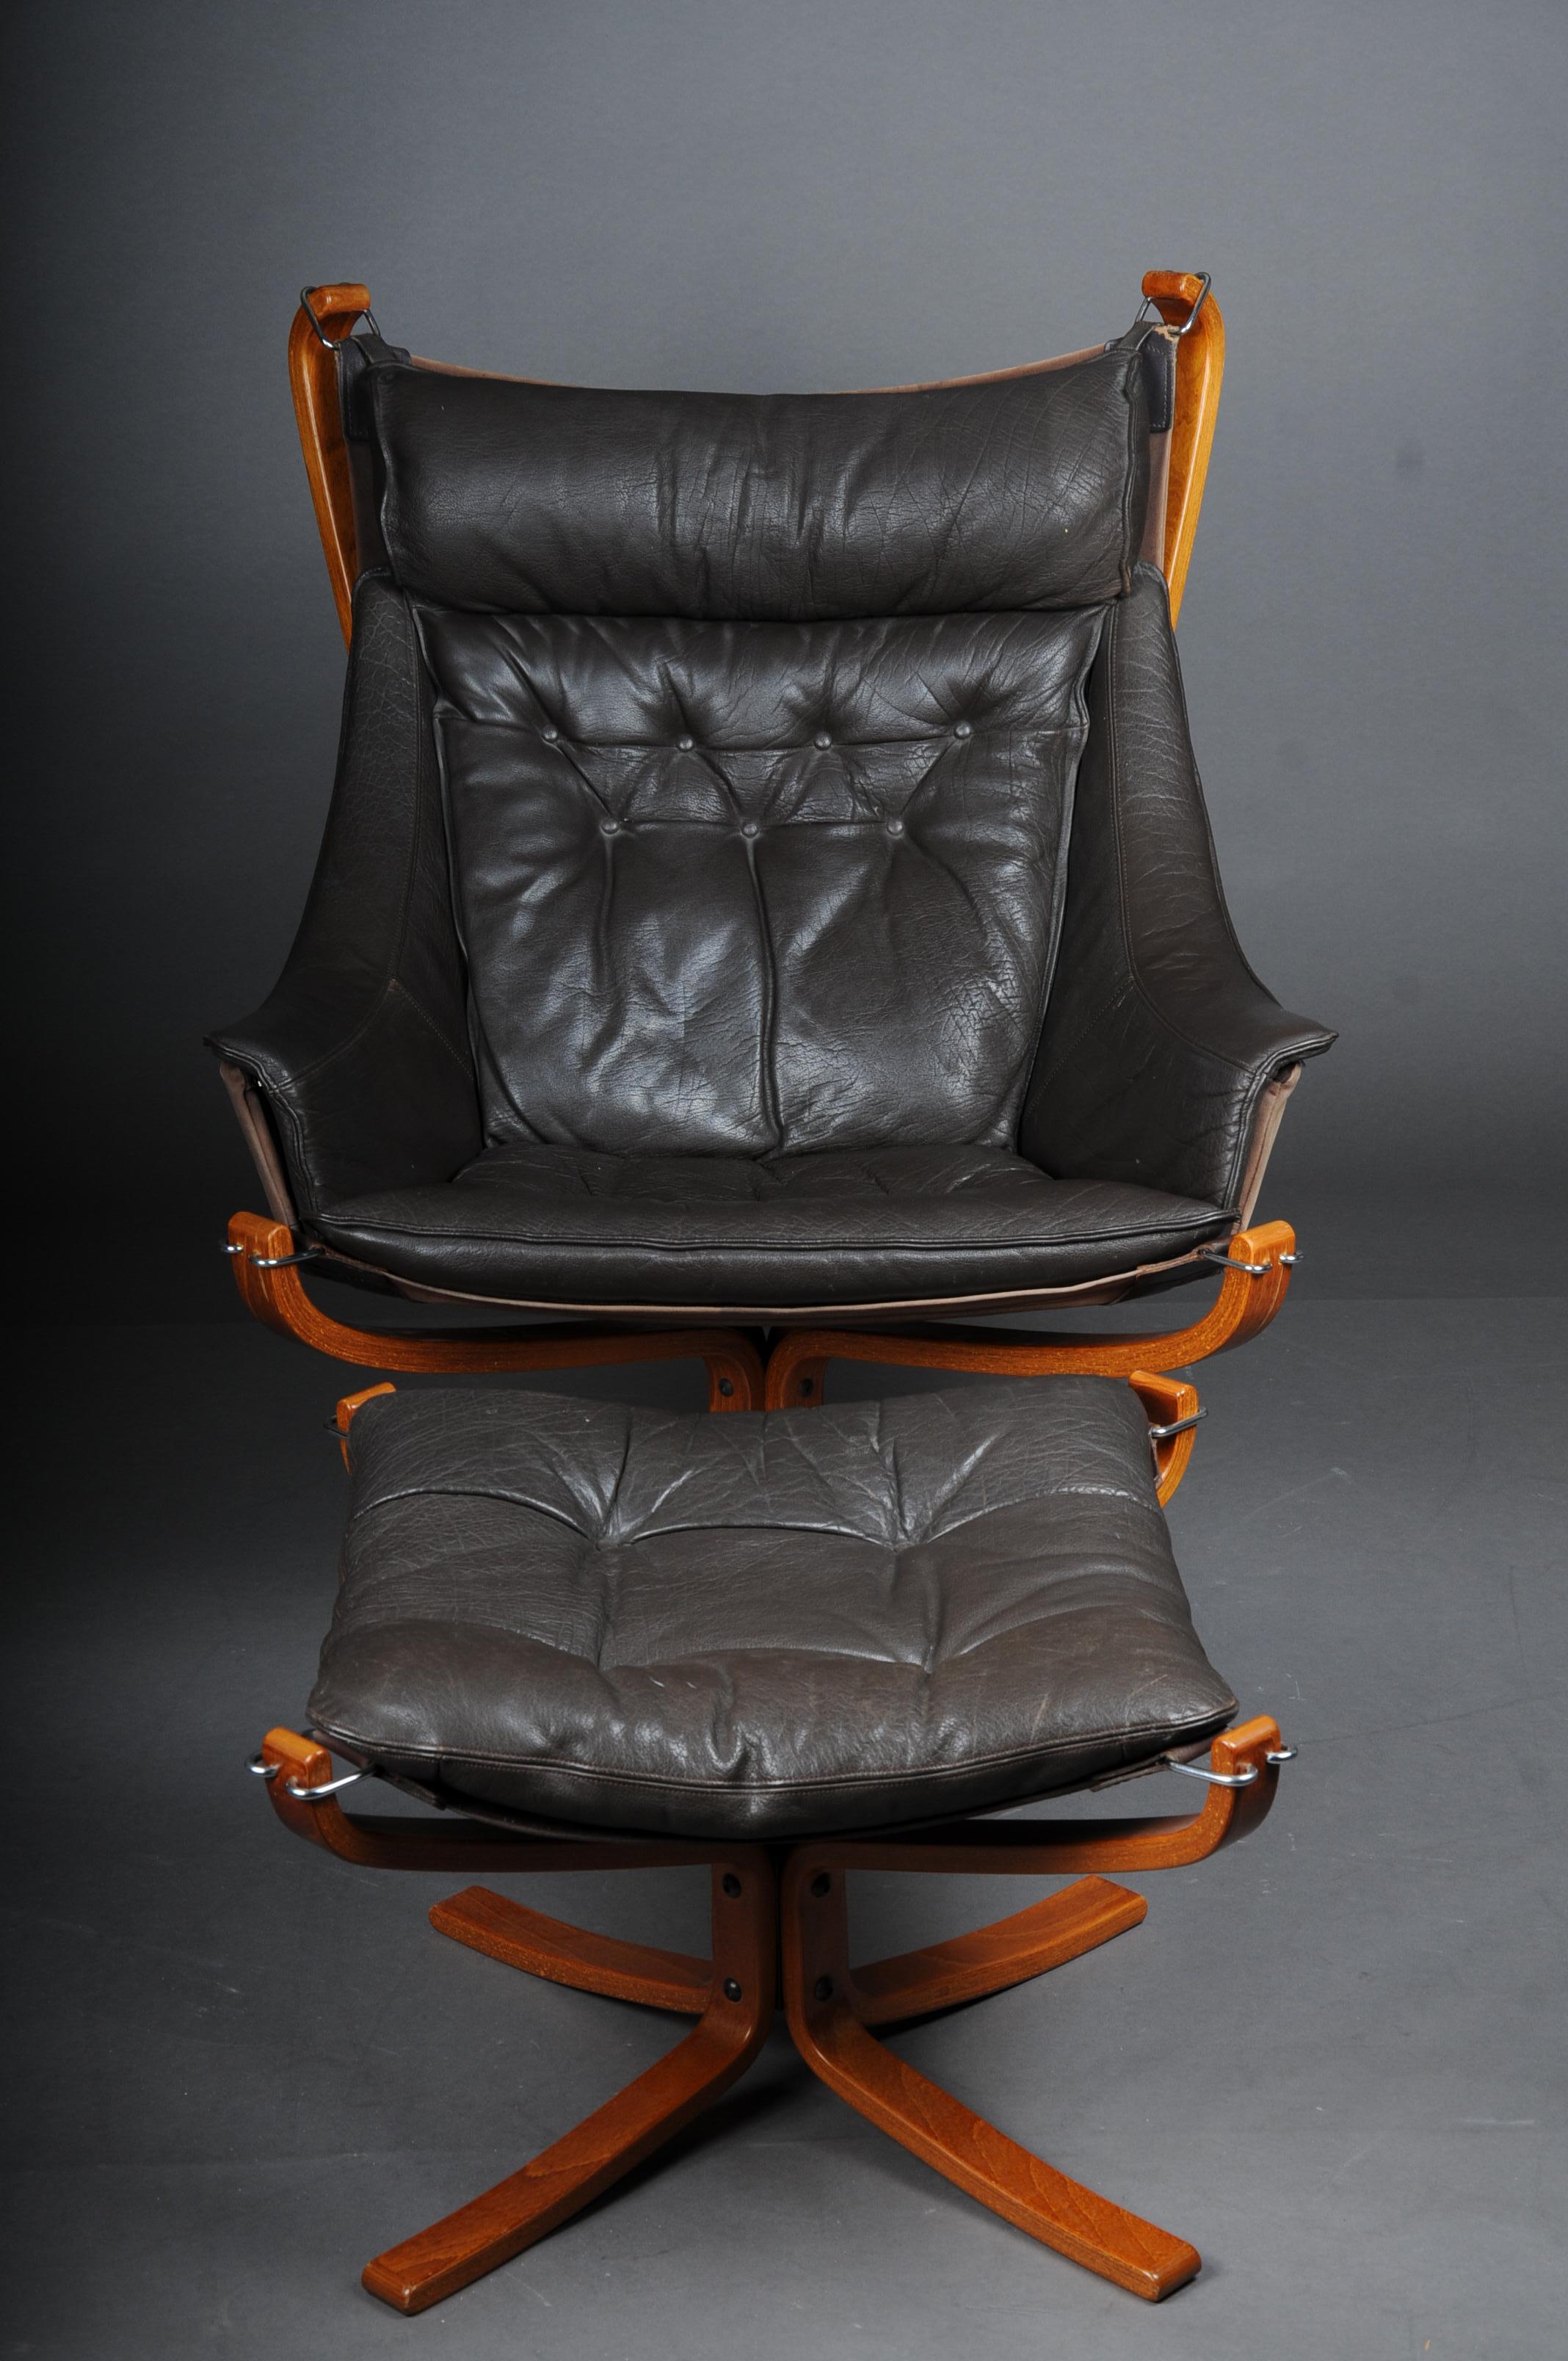 20th Century Falcon lounge chair with footstool, leather, vintage

Absolute classic from Falcon Made in Norway.

Wooden frame with leather upholstery.

Footstool: height : 40 cm , diameter: 60 cm.